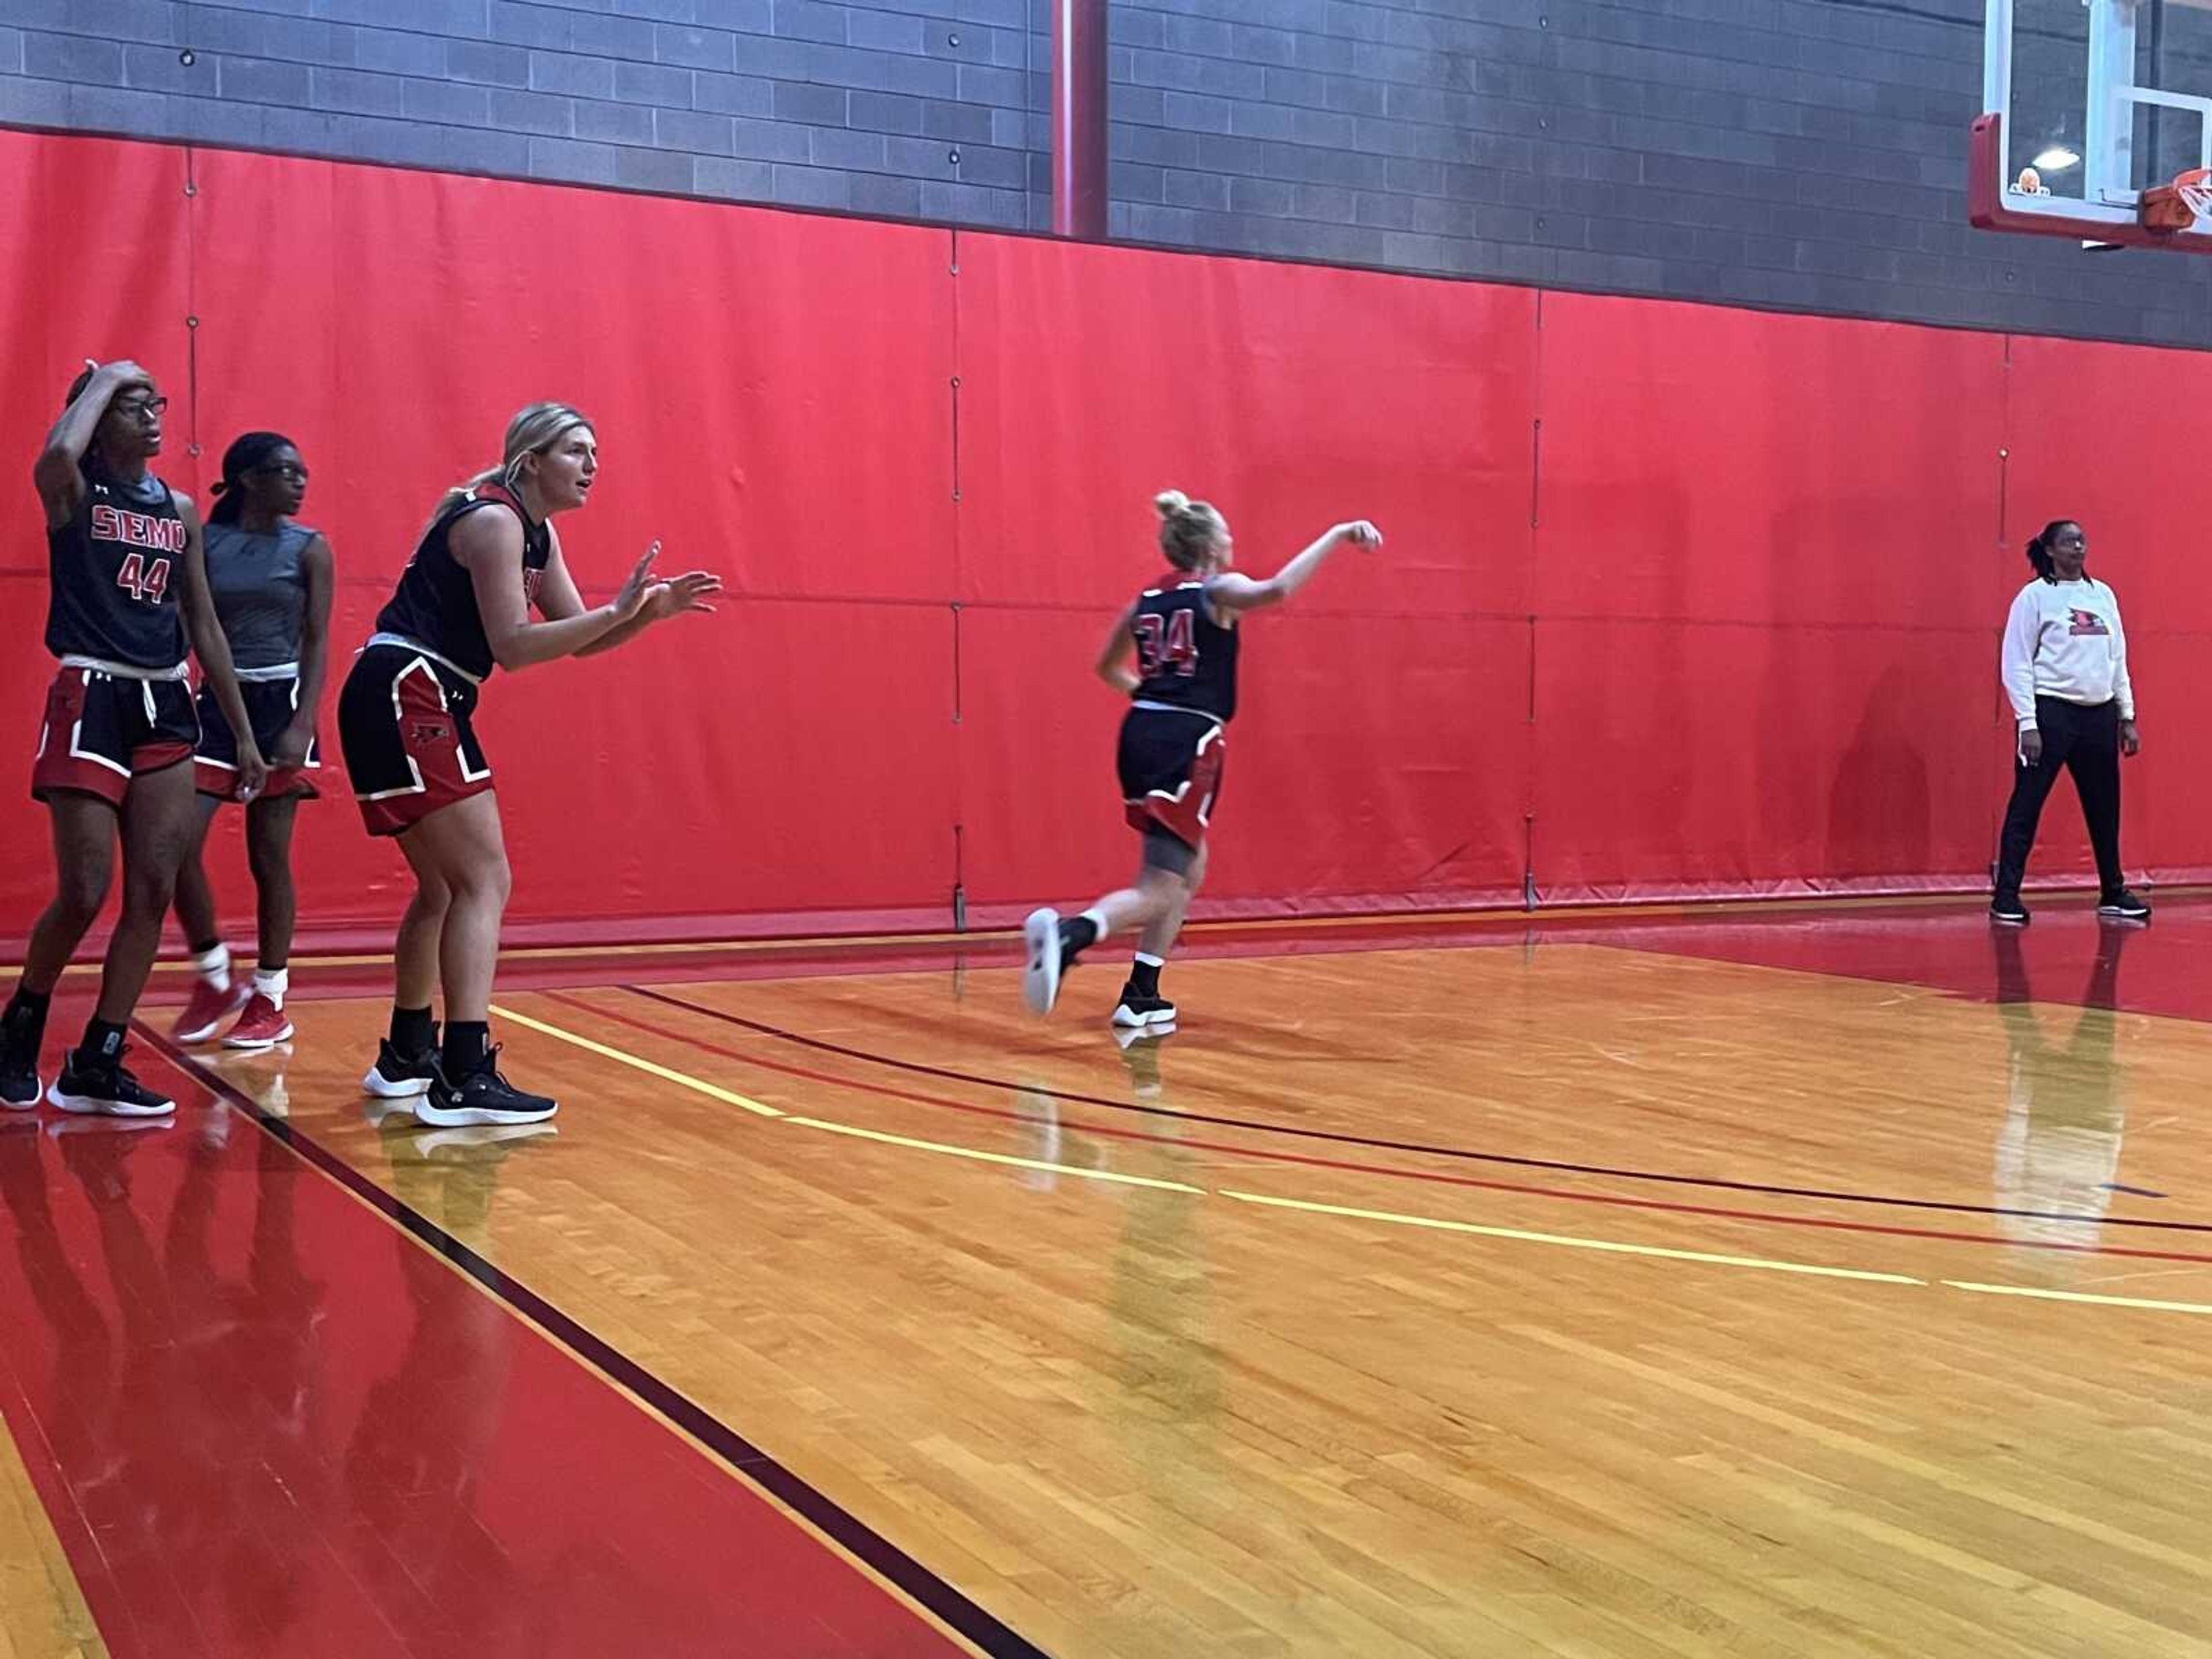 Members of the SEMO Women's basketball team run a drill during practice on Oct. 19.